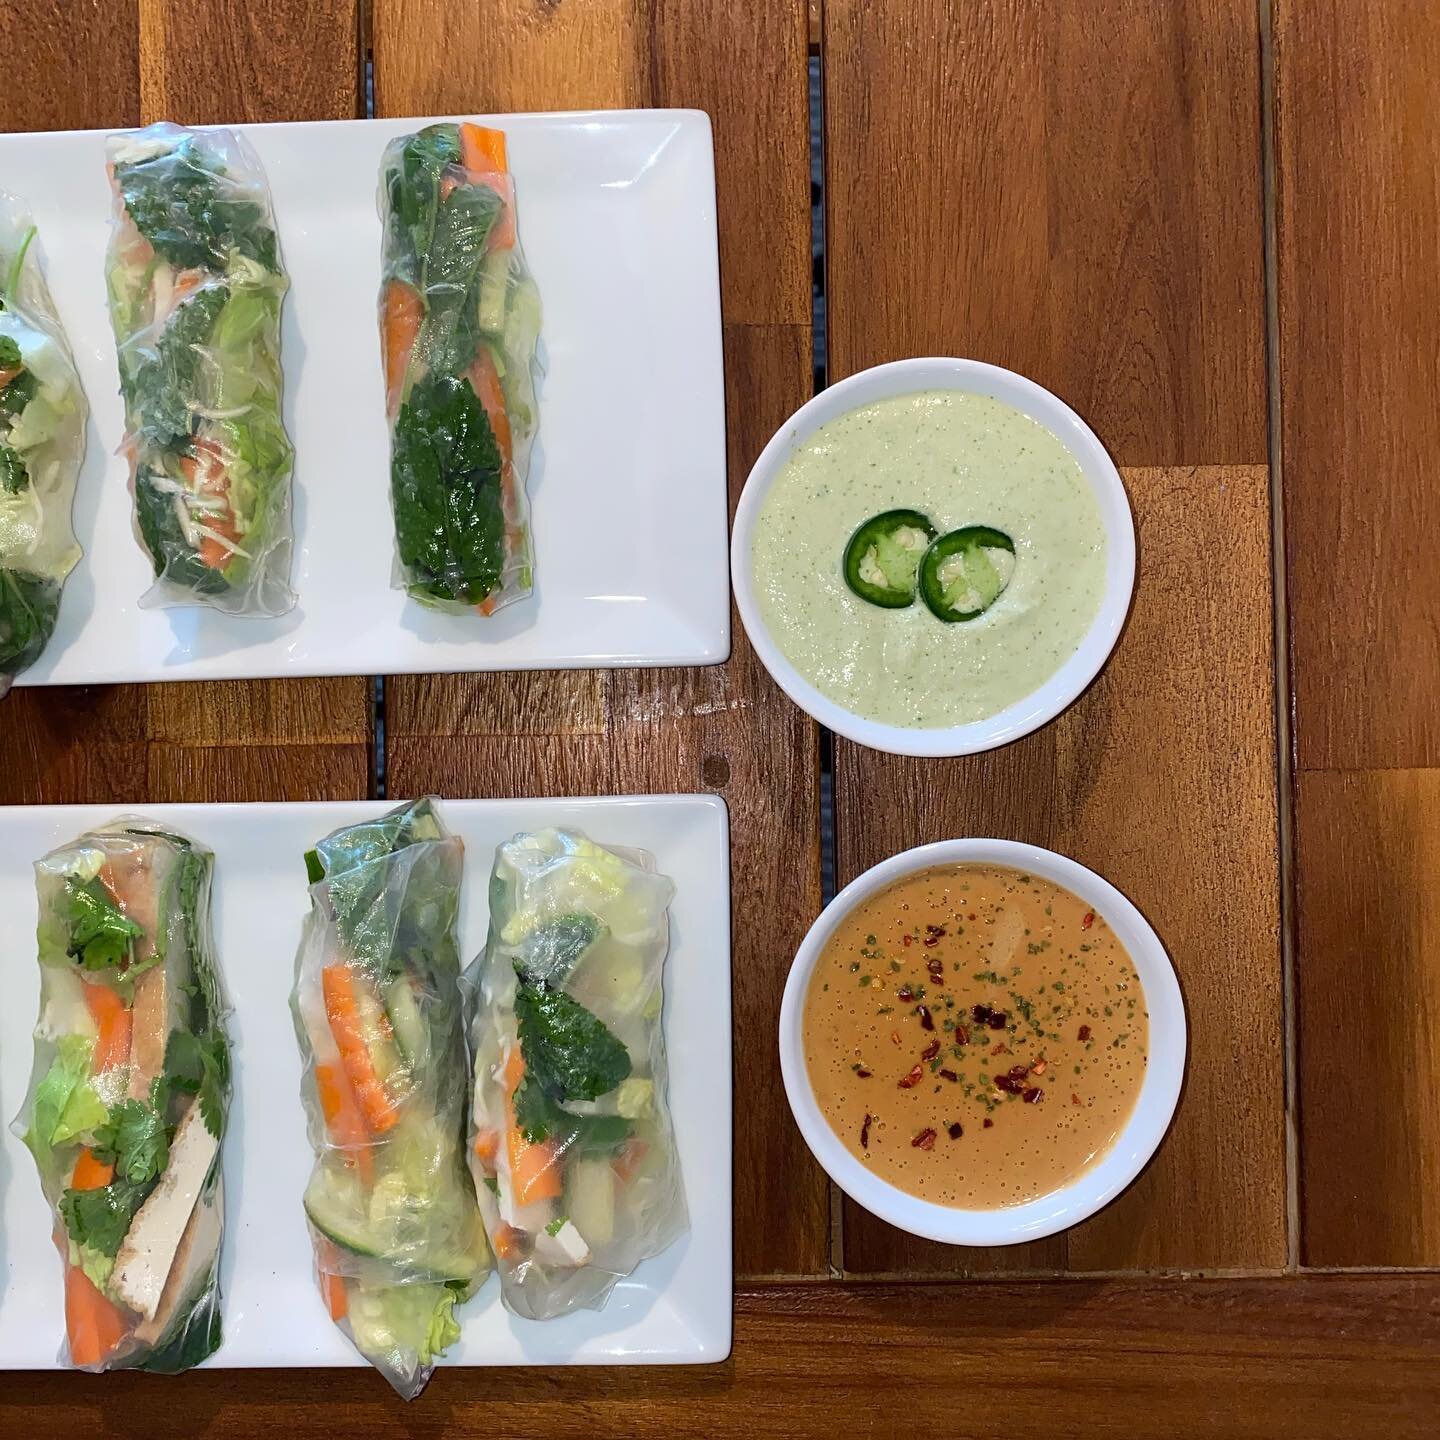 Summer rolls 🥬🥒🥕🥗🥜🌱🥑

I had some veggies and greens I wanted to salvage and then realized I could make summer rolls, sans (rice vermicelli) noodles. Next, I wondered what kind of sauce I could come up with, in addition to the traditional peanu